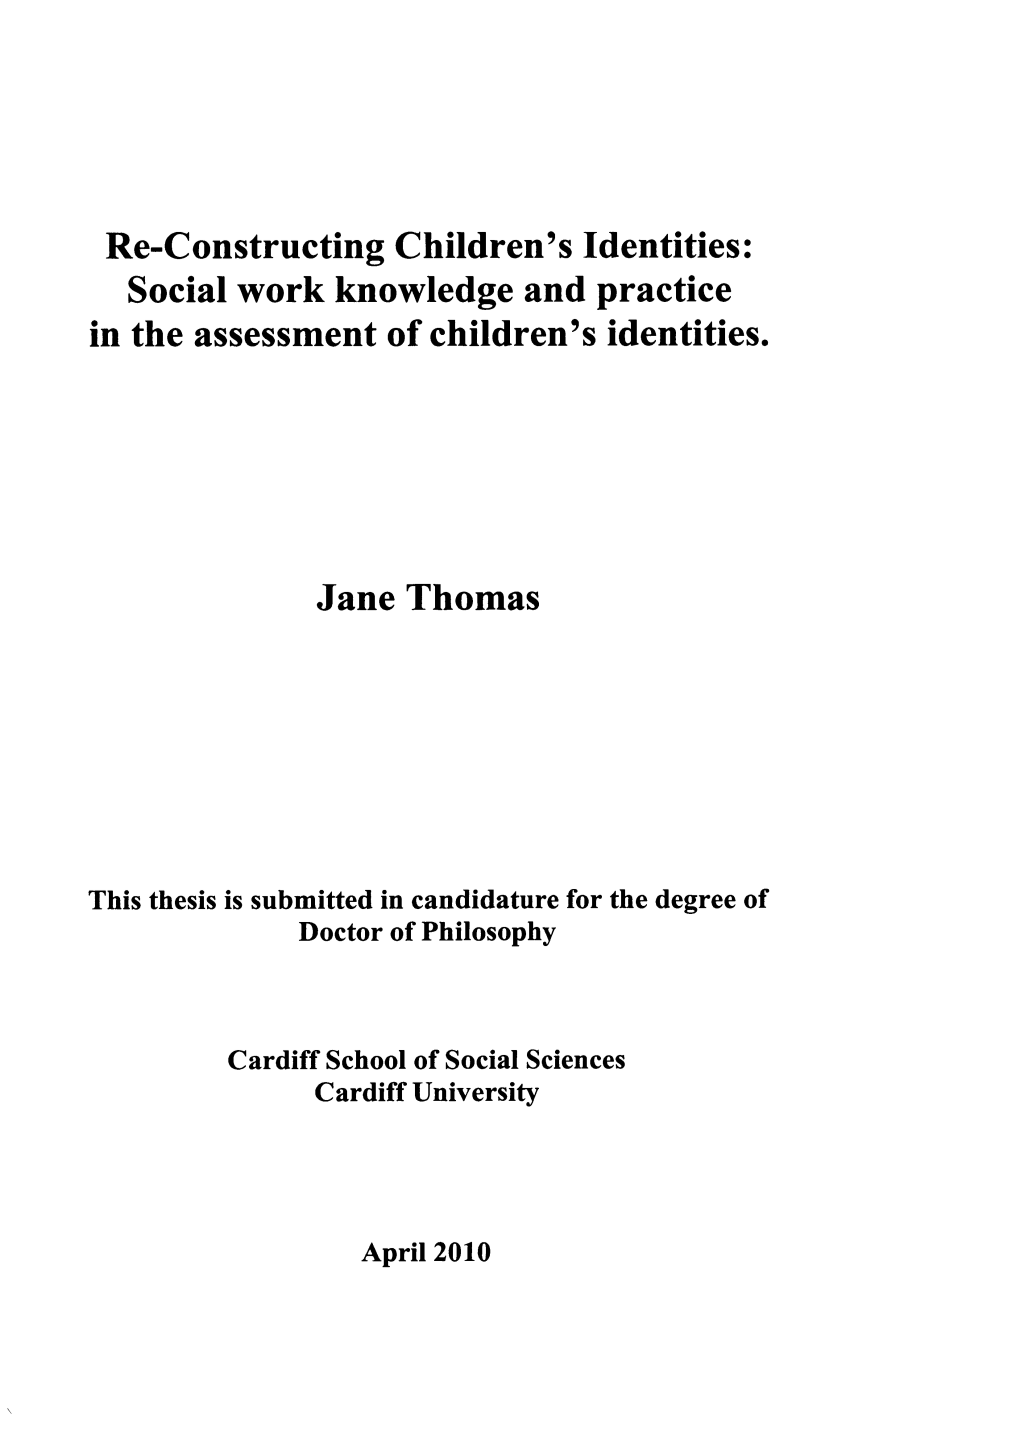 Re-Constructing Children's Identities: Social Work Knowledge And